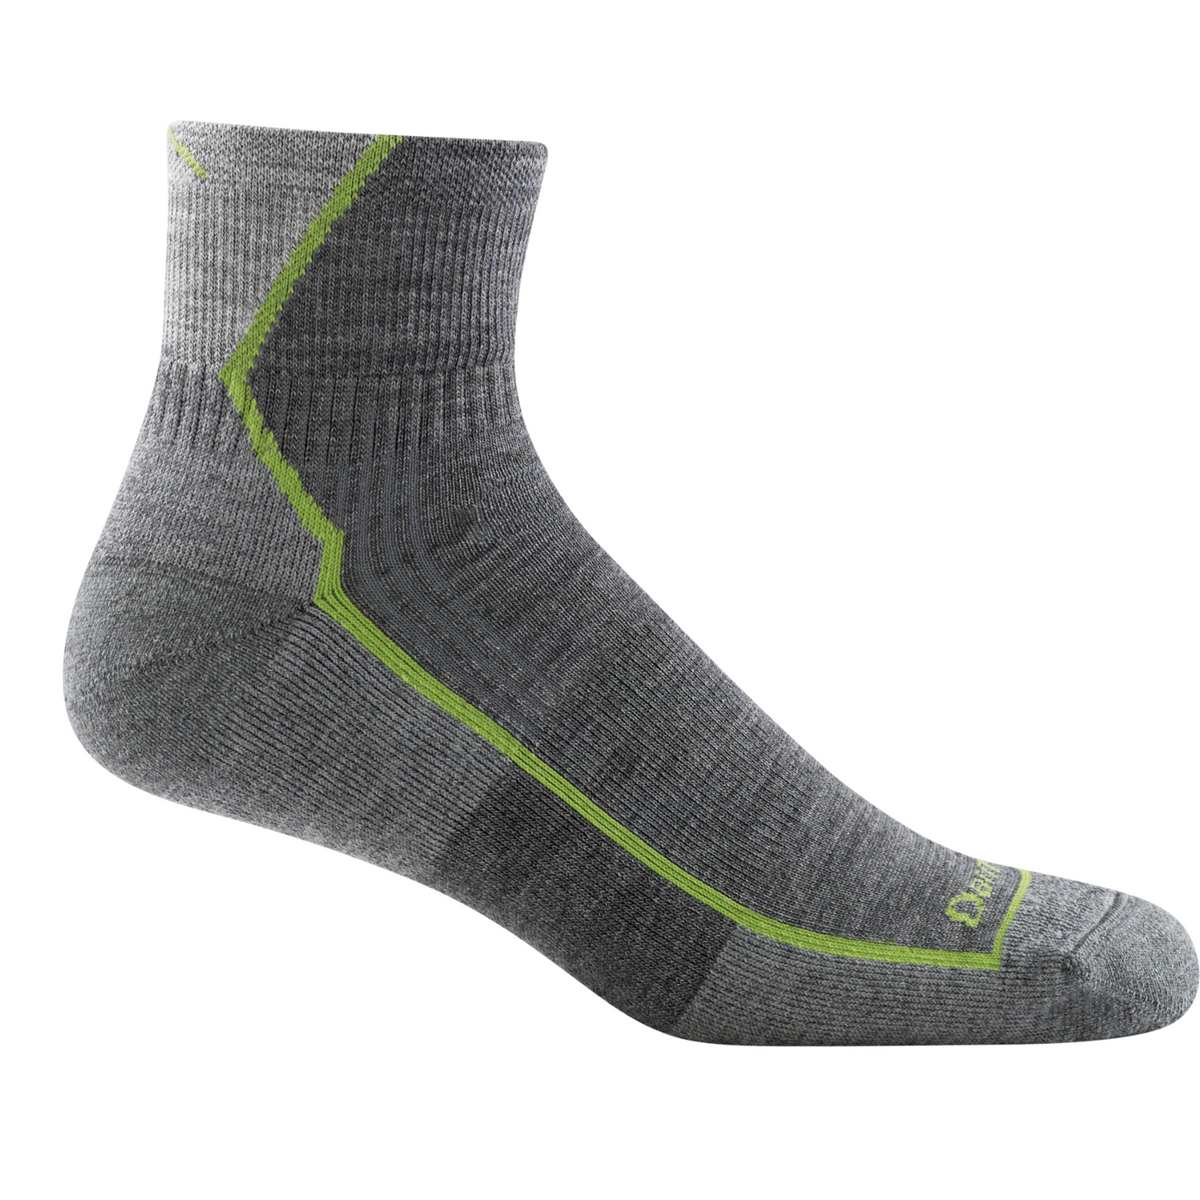 Darn Tough 1959 Quarter Height Midweight with Cushion Hike Men&#39;s Sock in gray on display from side